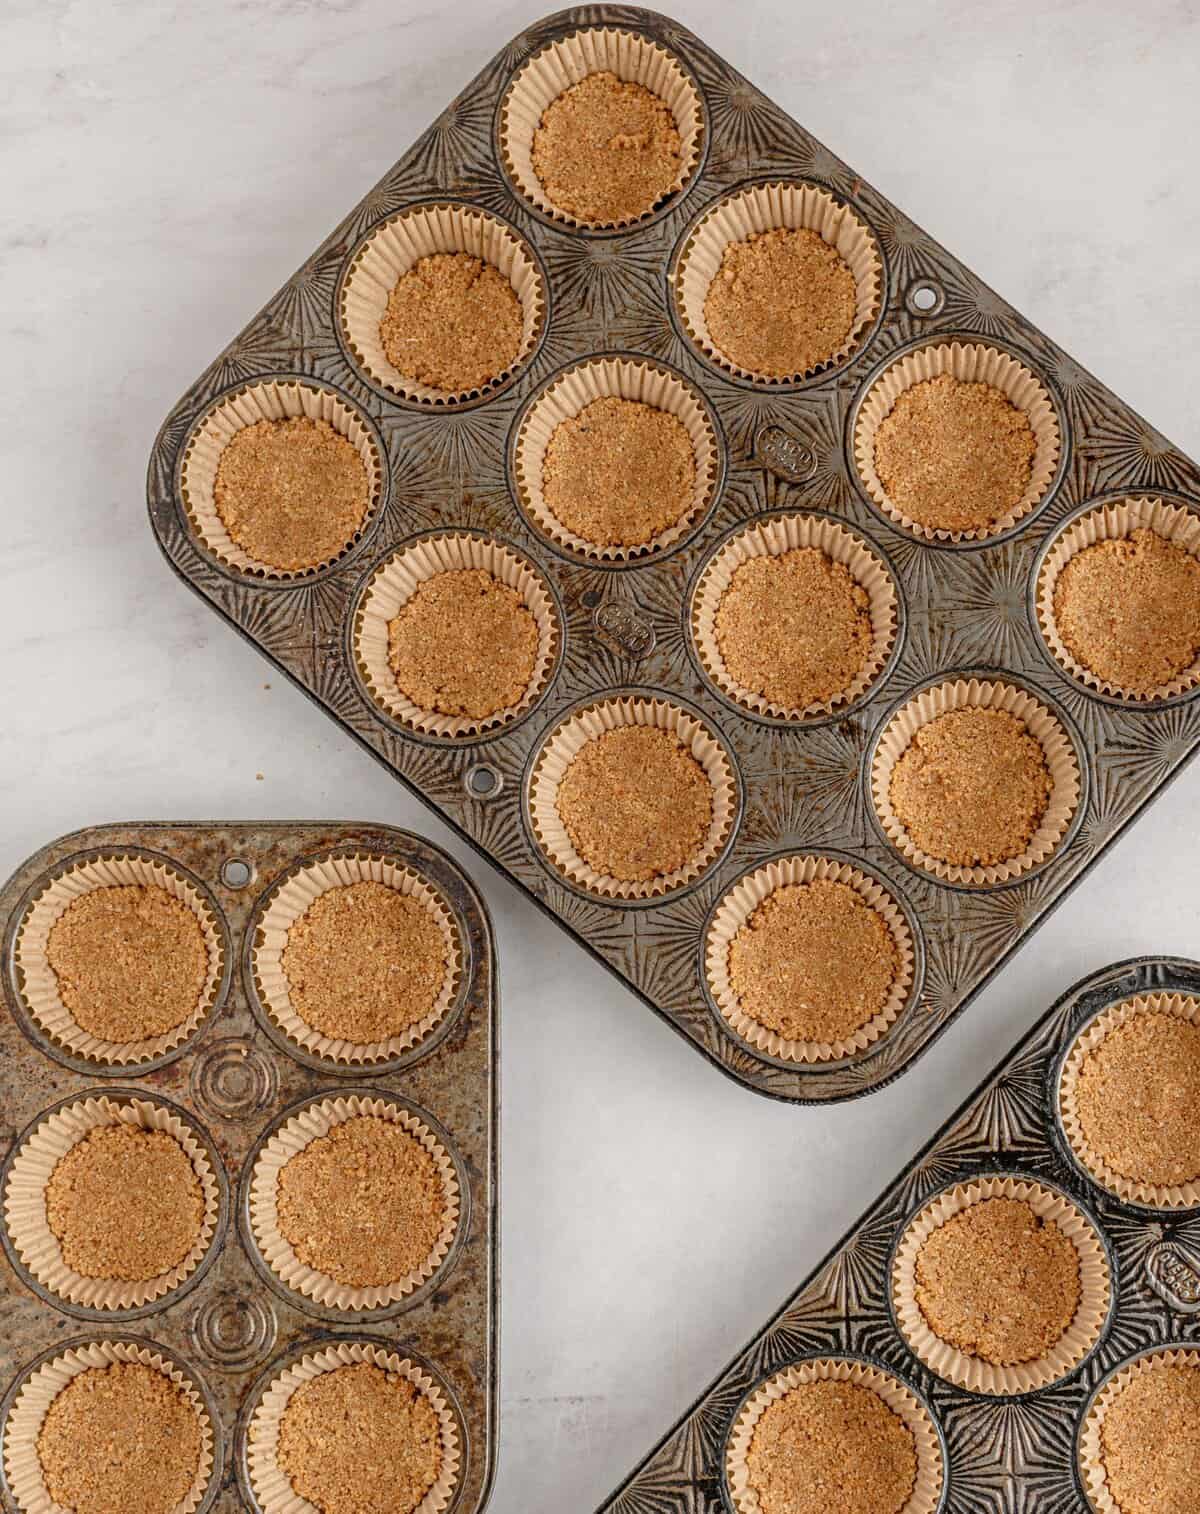 Muffin tins with paper liners with crust pressed into them.